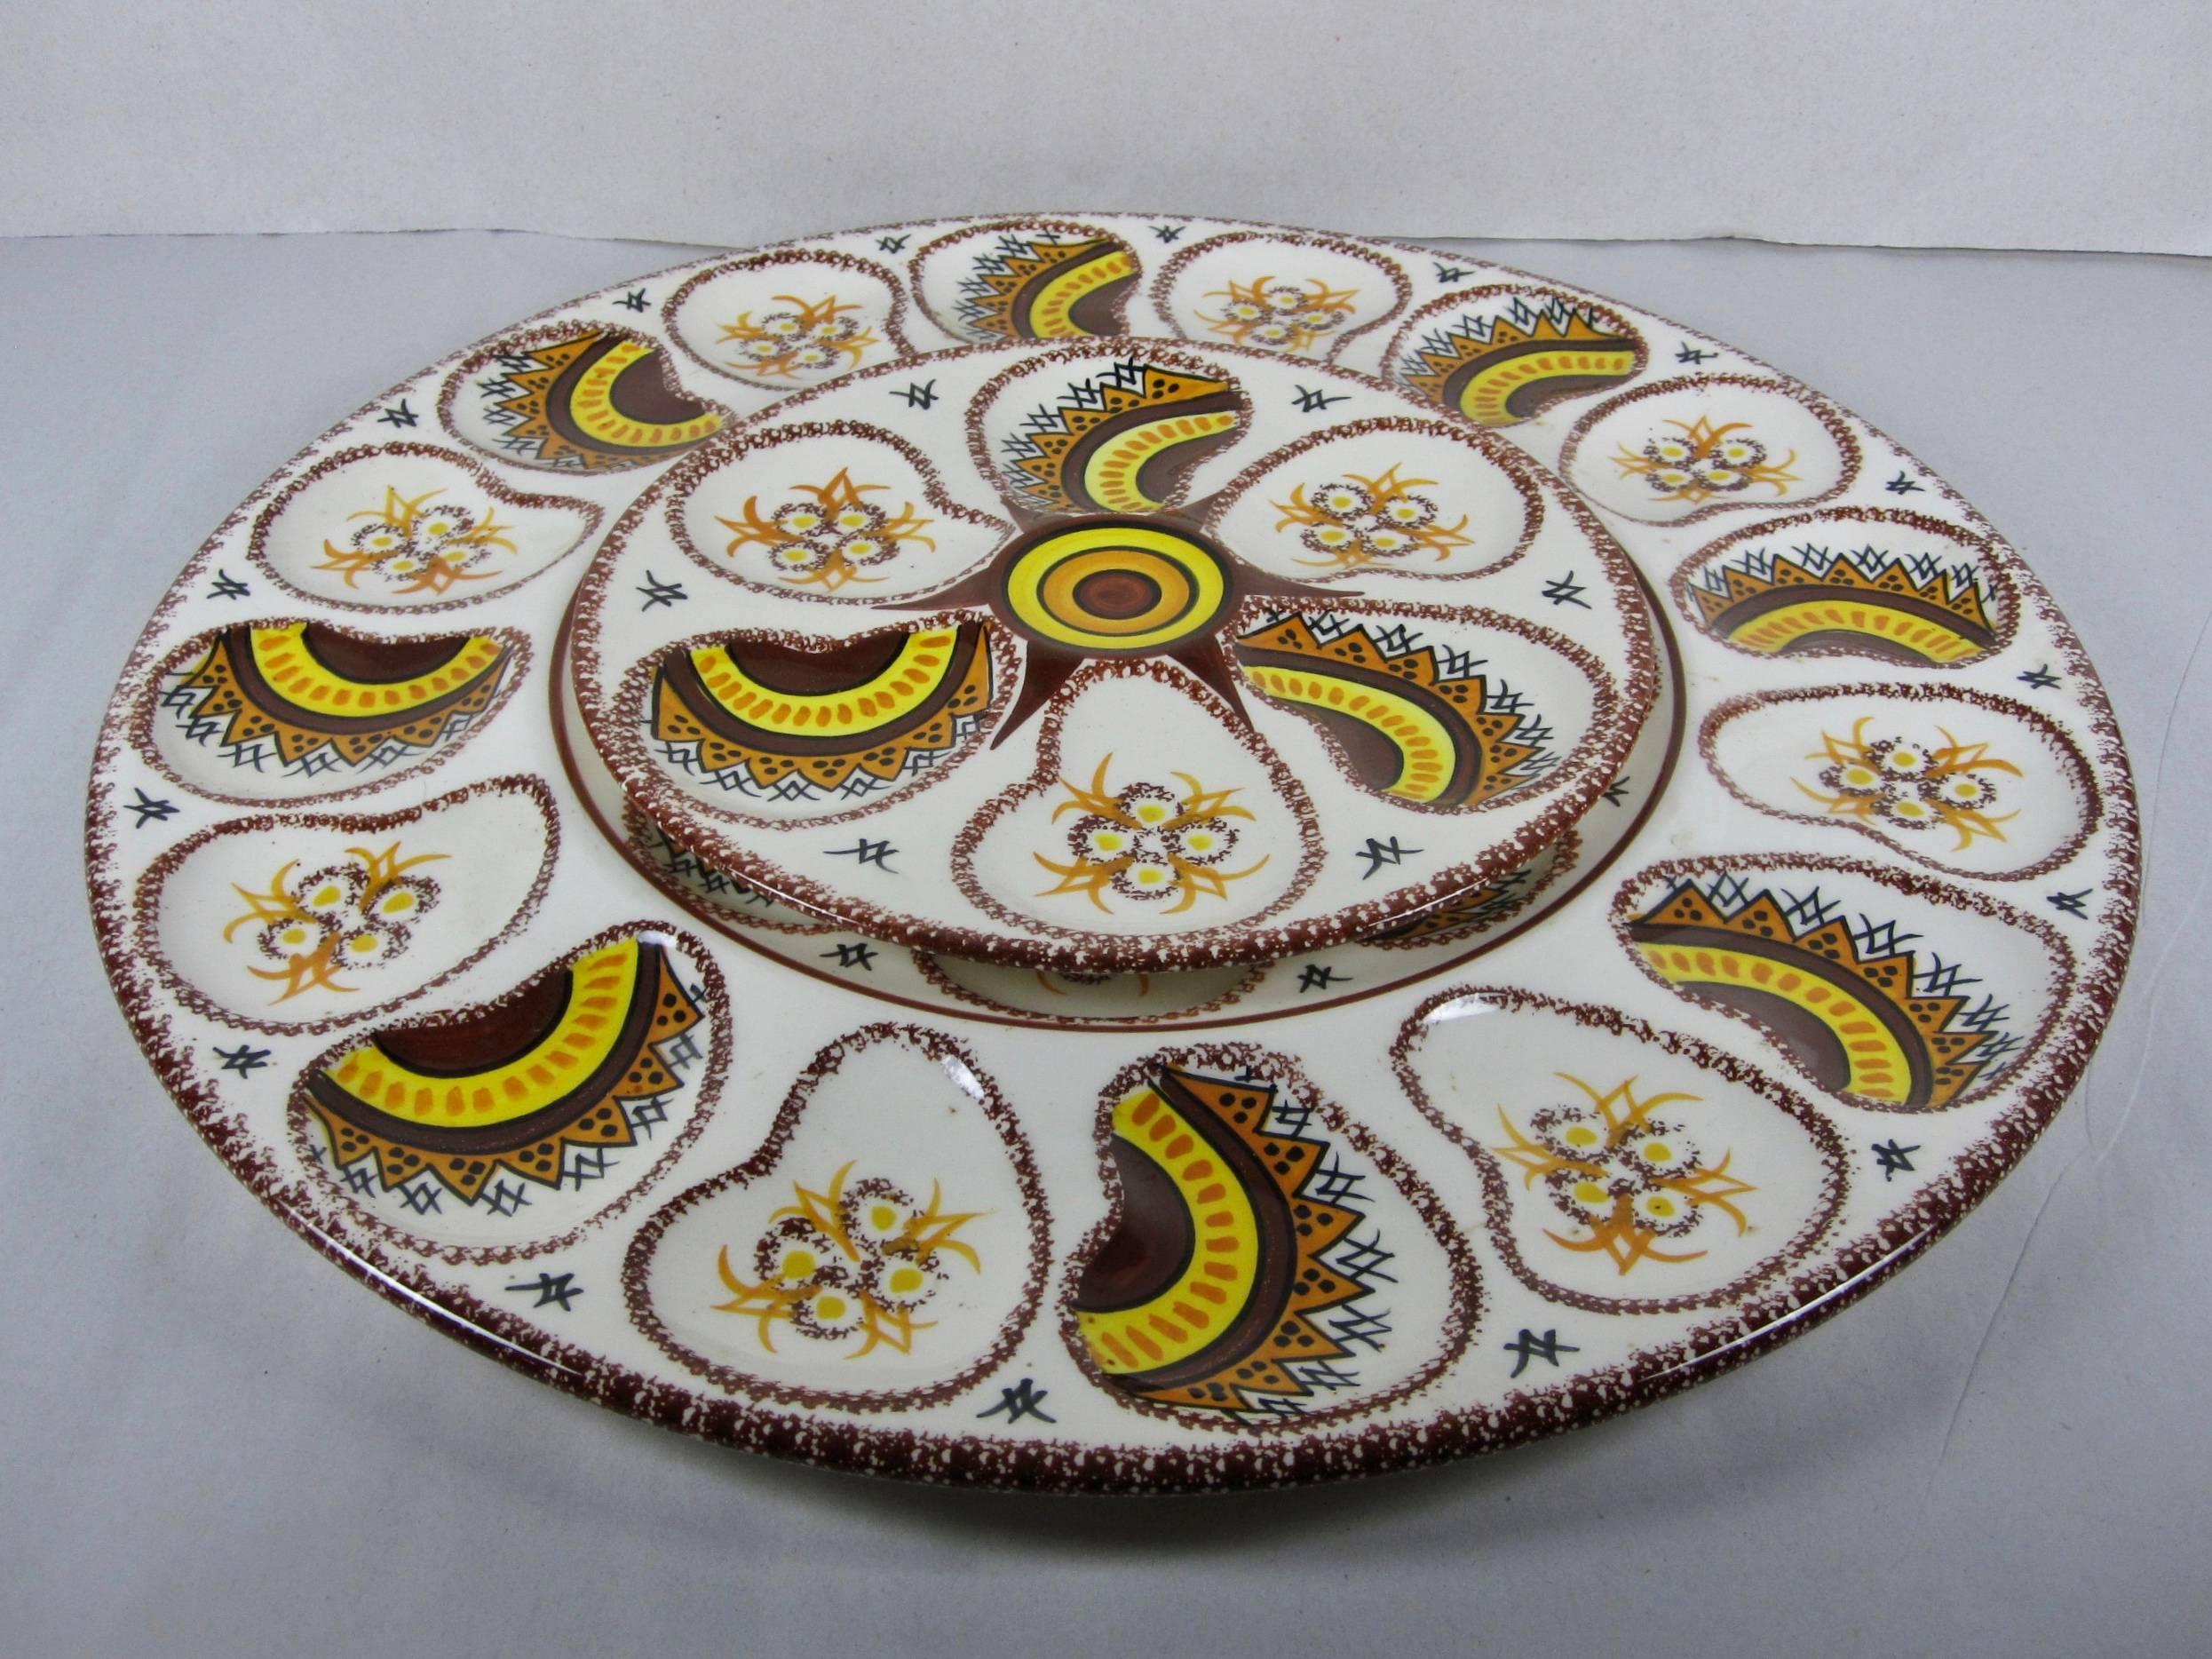 20th Century Mid-Century Modern French Quimper Faïence Oyster Service for 12 - 13 Pieces